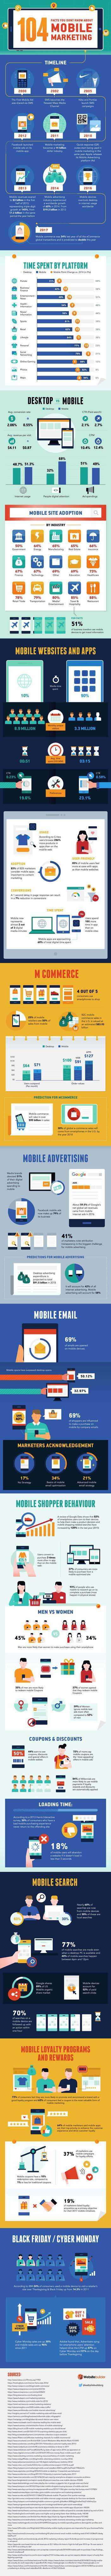 Mobile Marketing Facts